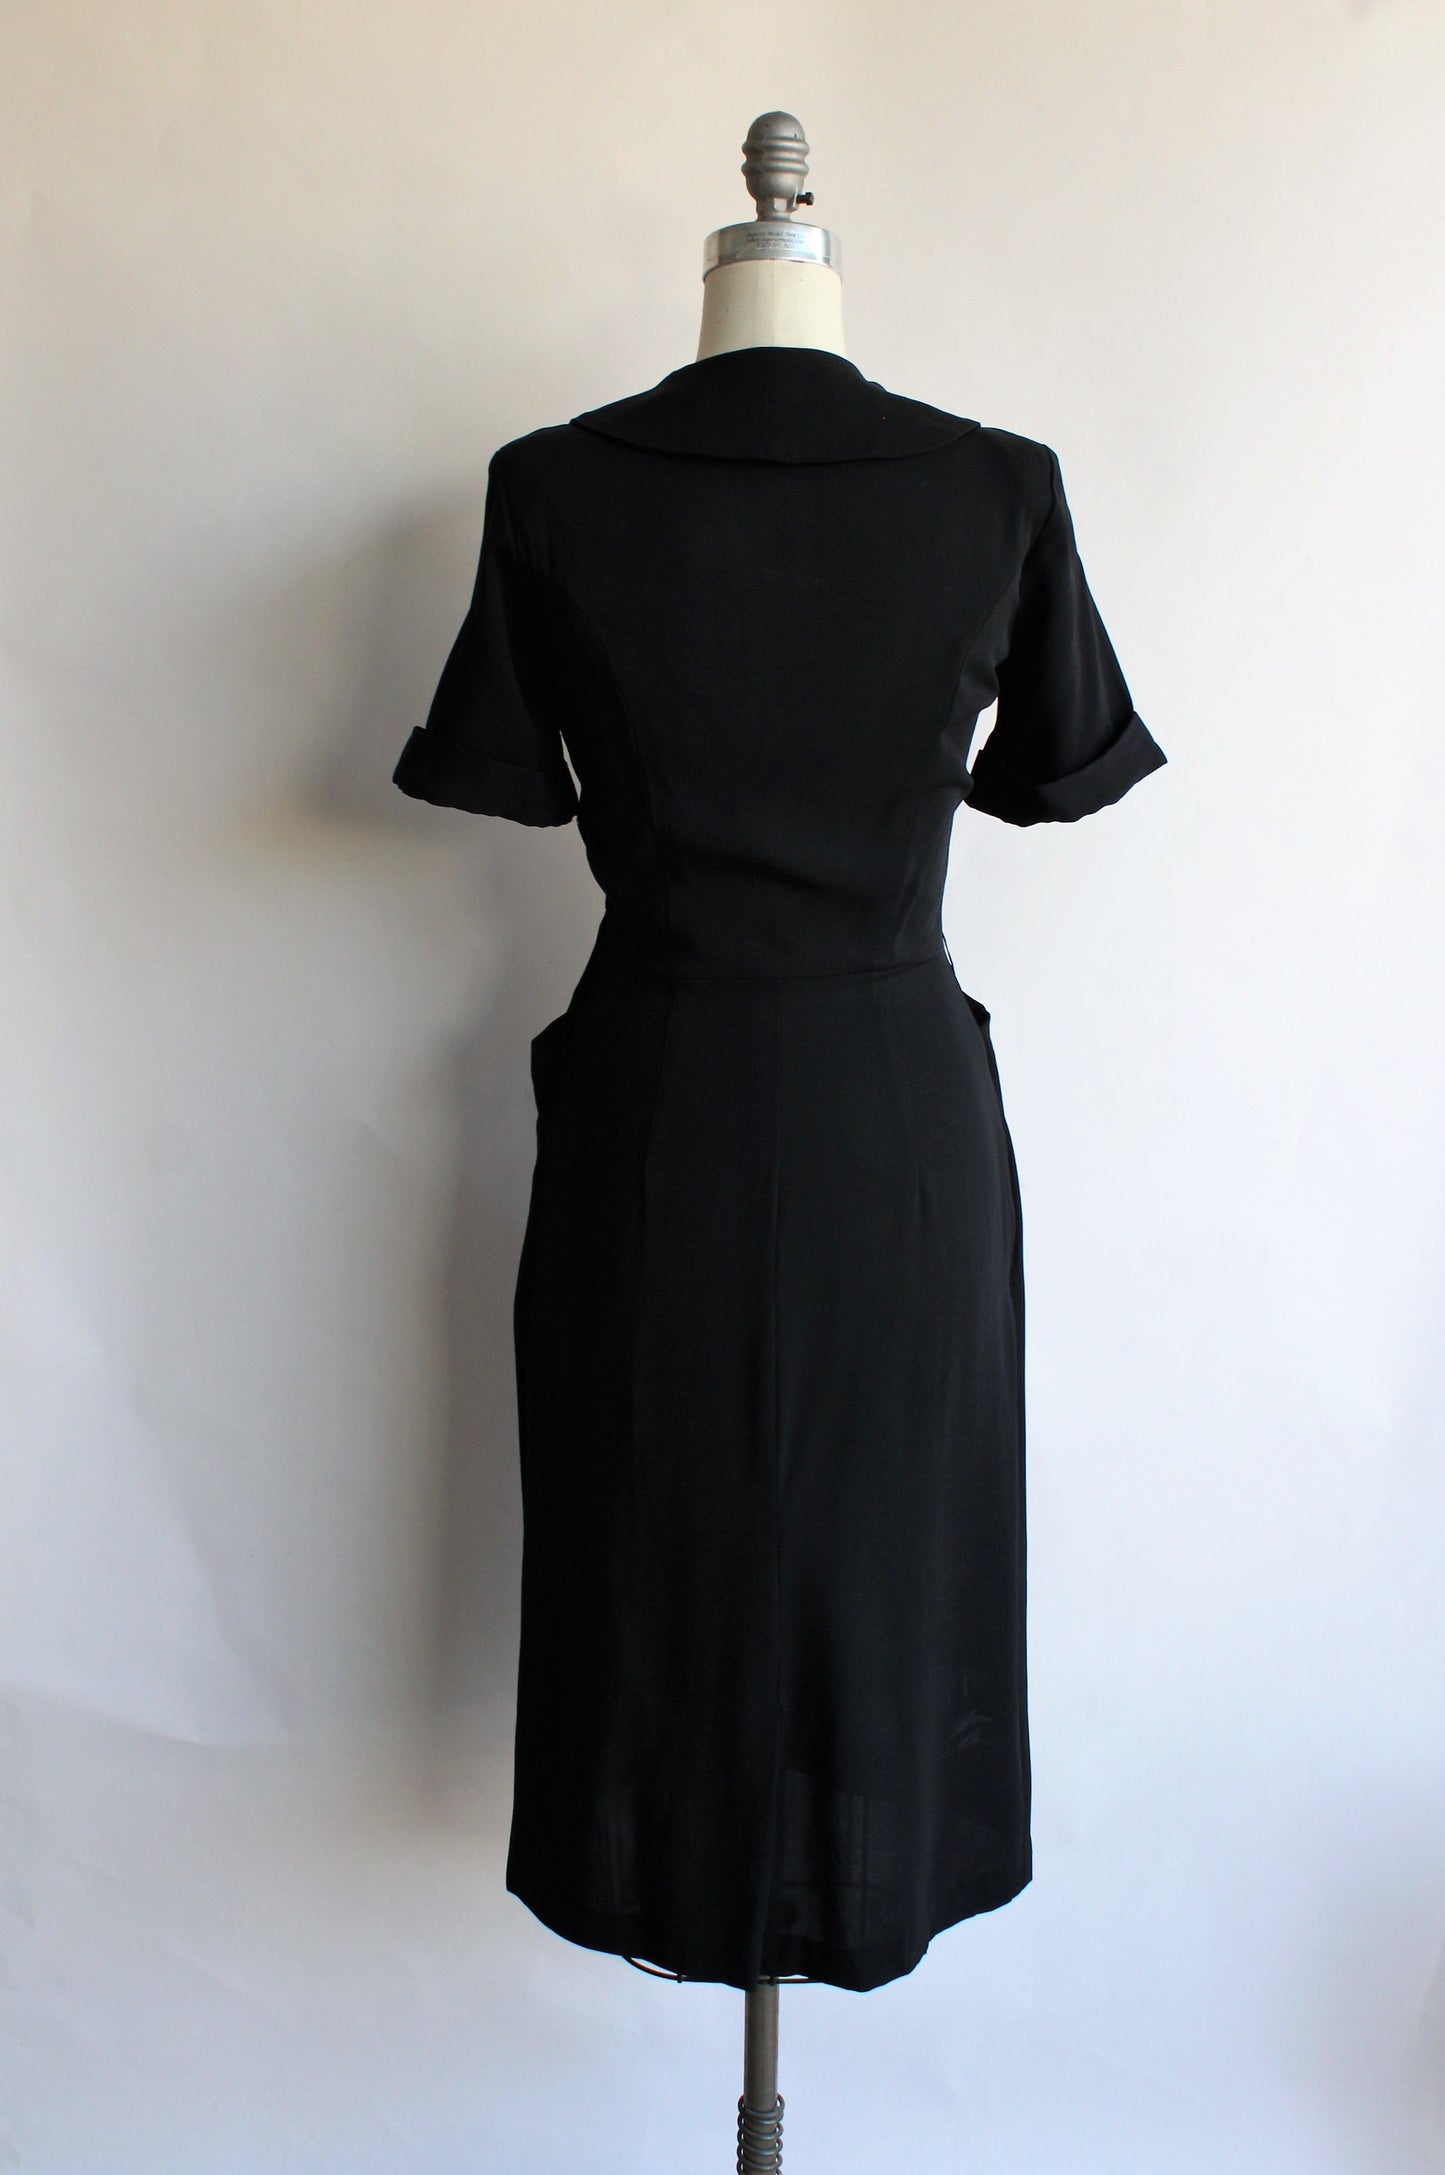 Vintage 1940s Rayon Crepe Dress with Pockets, Keyhole Neck and Peter Pan Collar